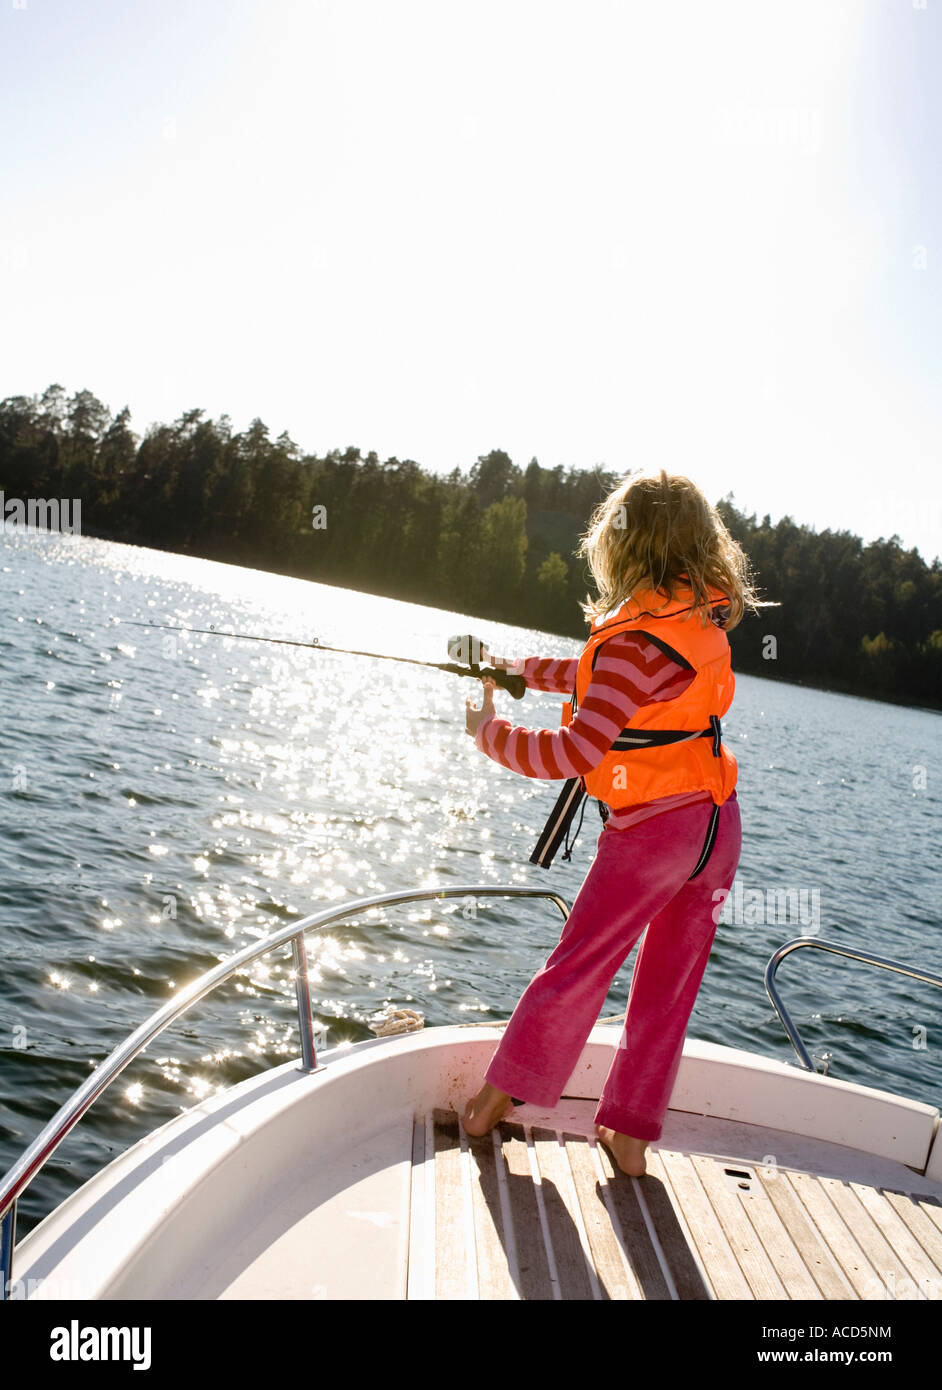 A girl fishing from a boat. Stock Photo